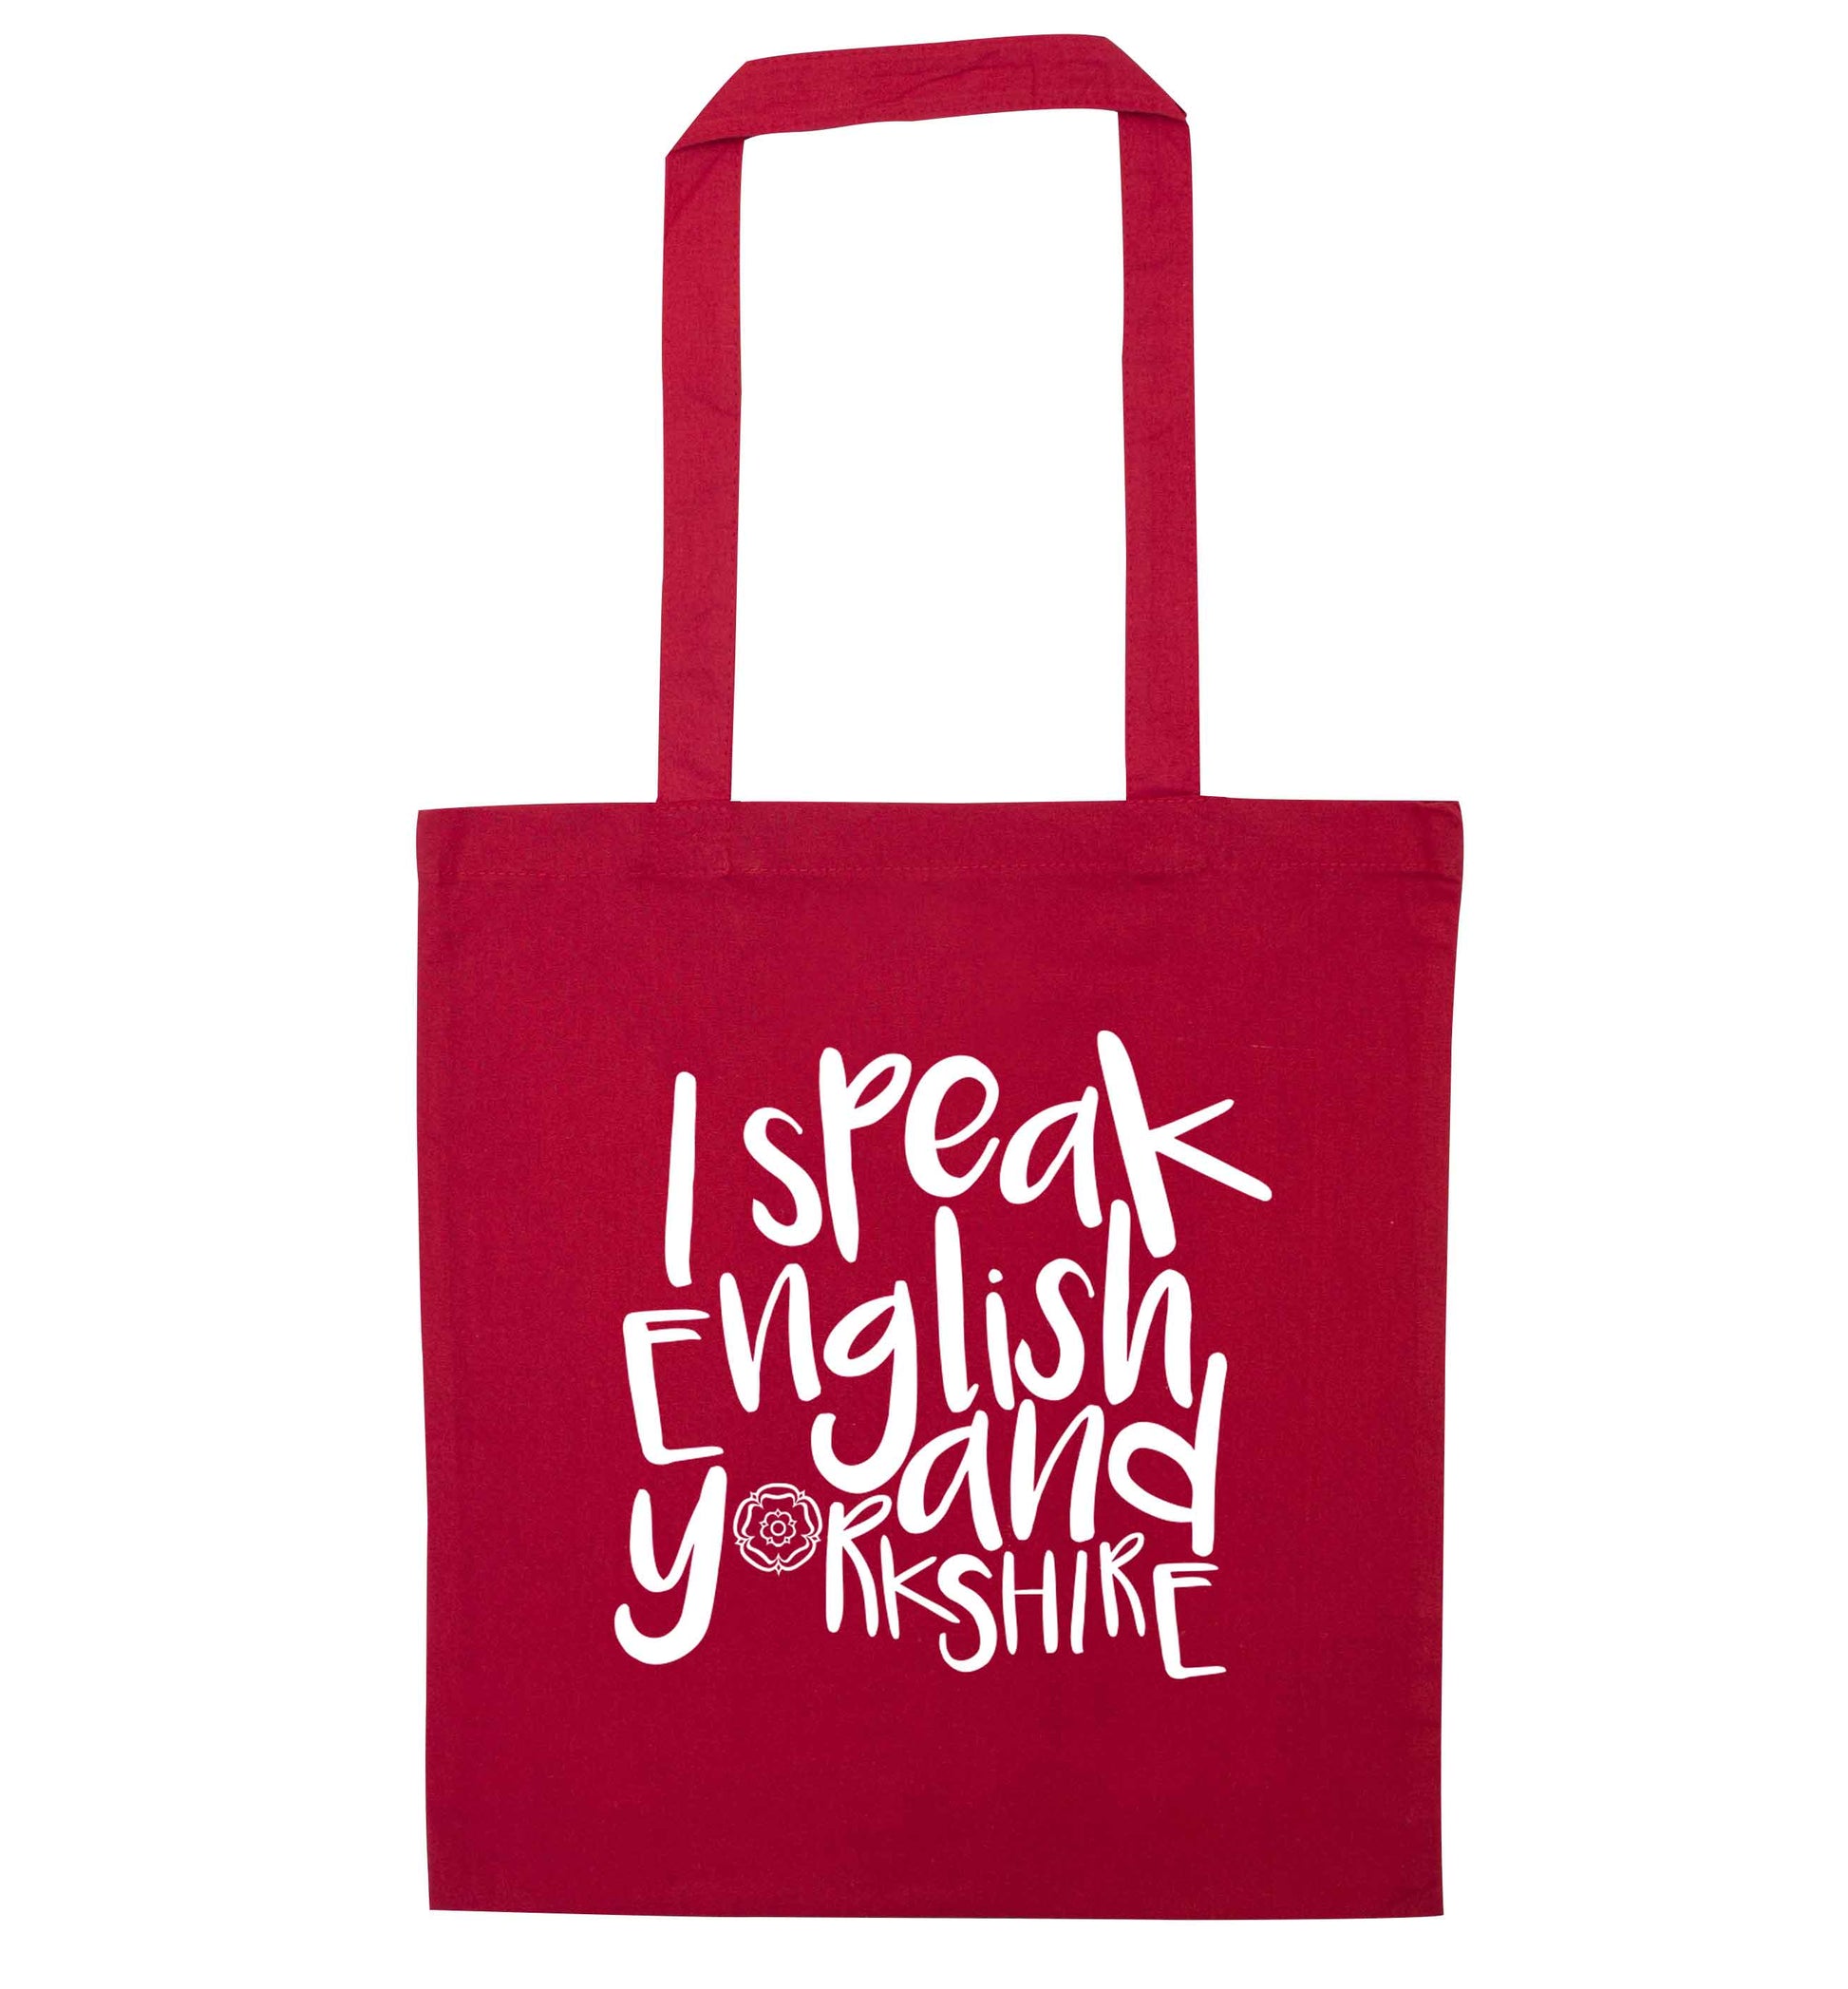 I speak English and Yorkshire red tote bag